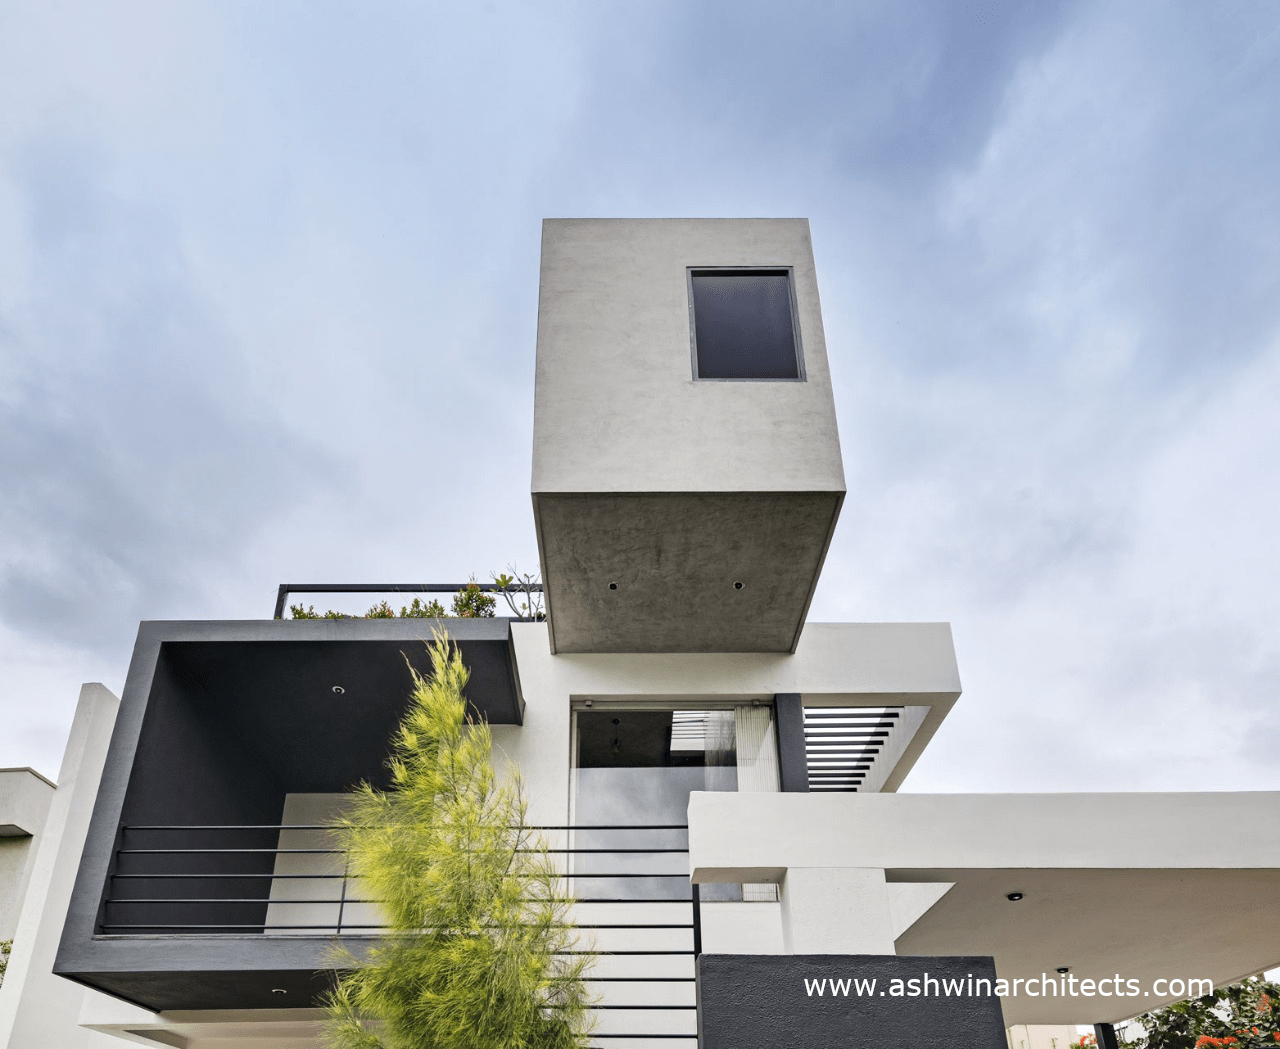 pawans-30-50-house-design-residential-architects-in-bangalore-front-ēlevation-top